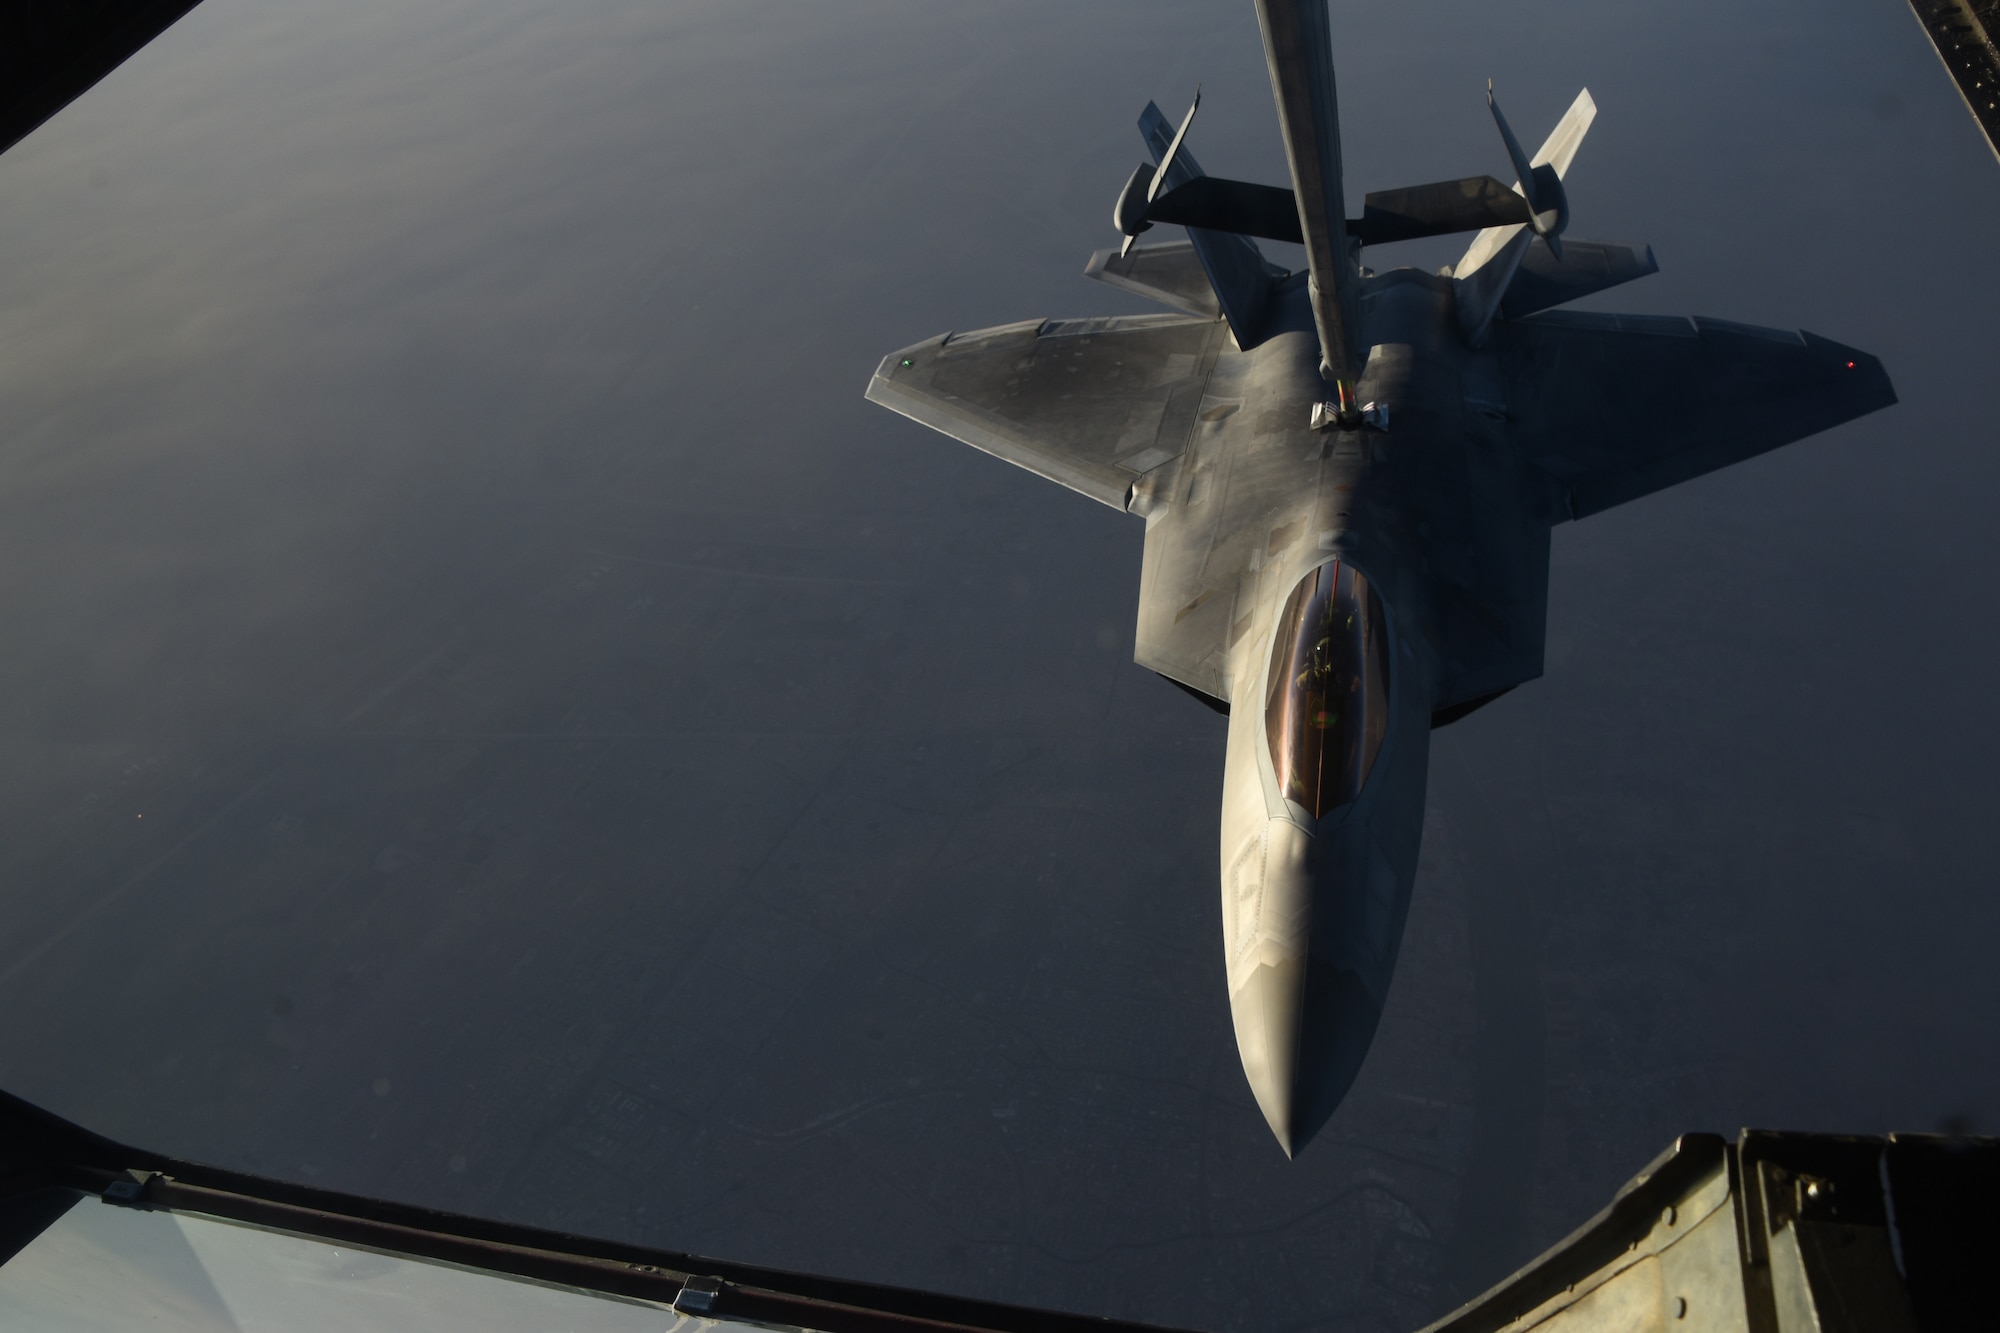 An U.S Air Force F-22 Raptor receives fuel from a KC-10 Extender during a mission in support of Operation Inherent Resolve over Iraq, Feb. 2, 2018. The F-22 is a component of the Global Strike Task Force, supporting U.S. and Coalition forces working to liberate territory and people under the control of ISIS. (U.S. Air National Guard photo by Staff Sgt. Colton Elliott)